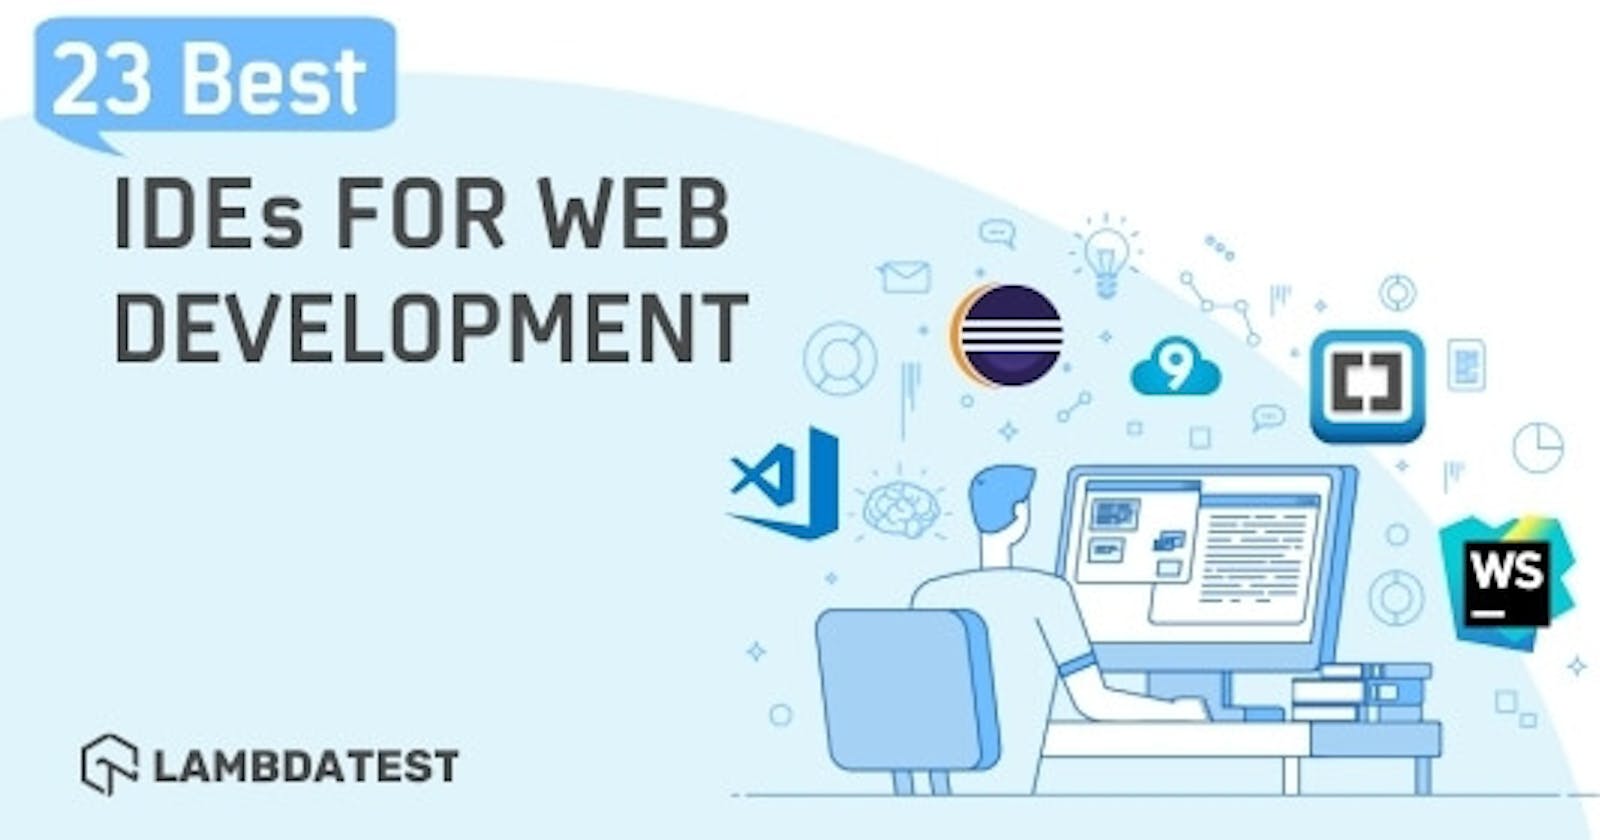 23 Of The Best IDEs For Web Development